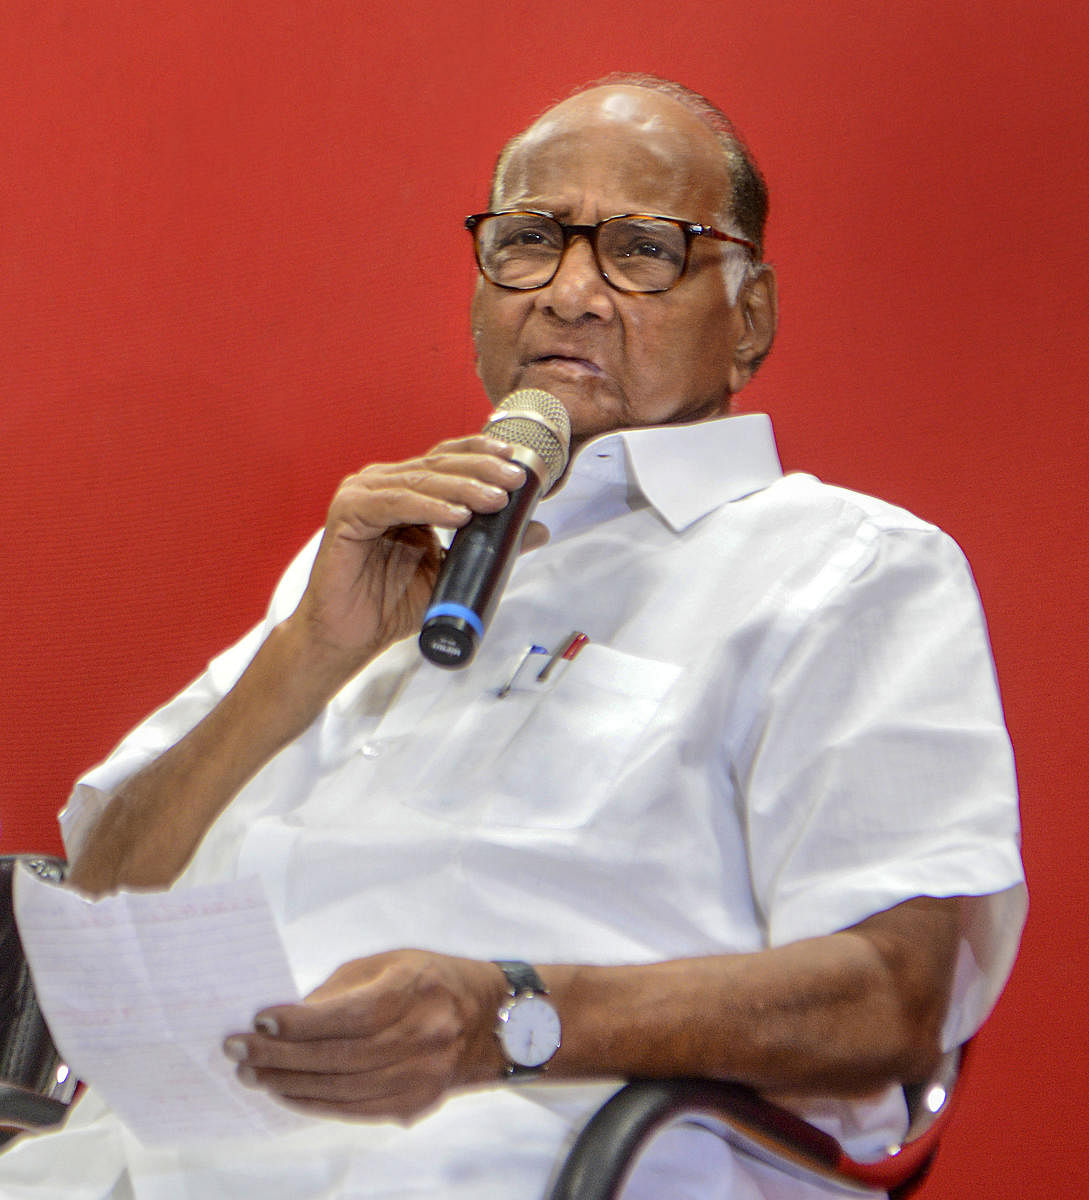 NCP Chief Sharad Pawar interacts with media personnel at Pune Union of Working Jounrnalist (PUWJ) in Pune, Saturday, Dec. 21, 2019. (PTI Photo)